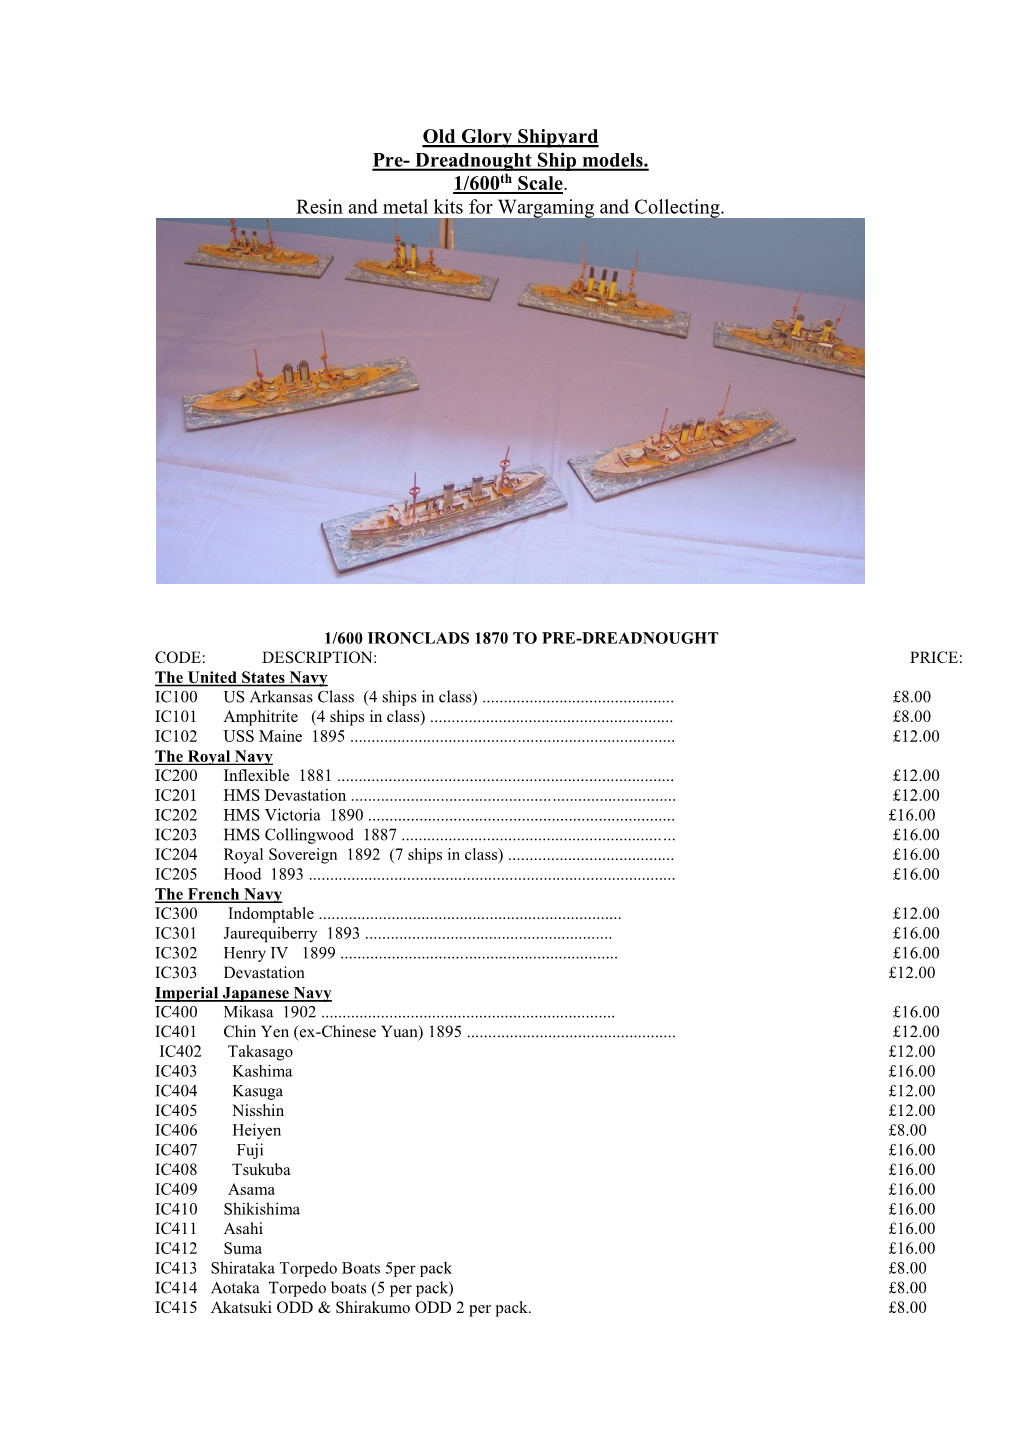 Old Glory Shipyard Pre- Dreadnought Ship Models. 1/600Th Scale. Resin and Metal Kits for Wargaming and Collecting